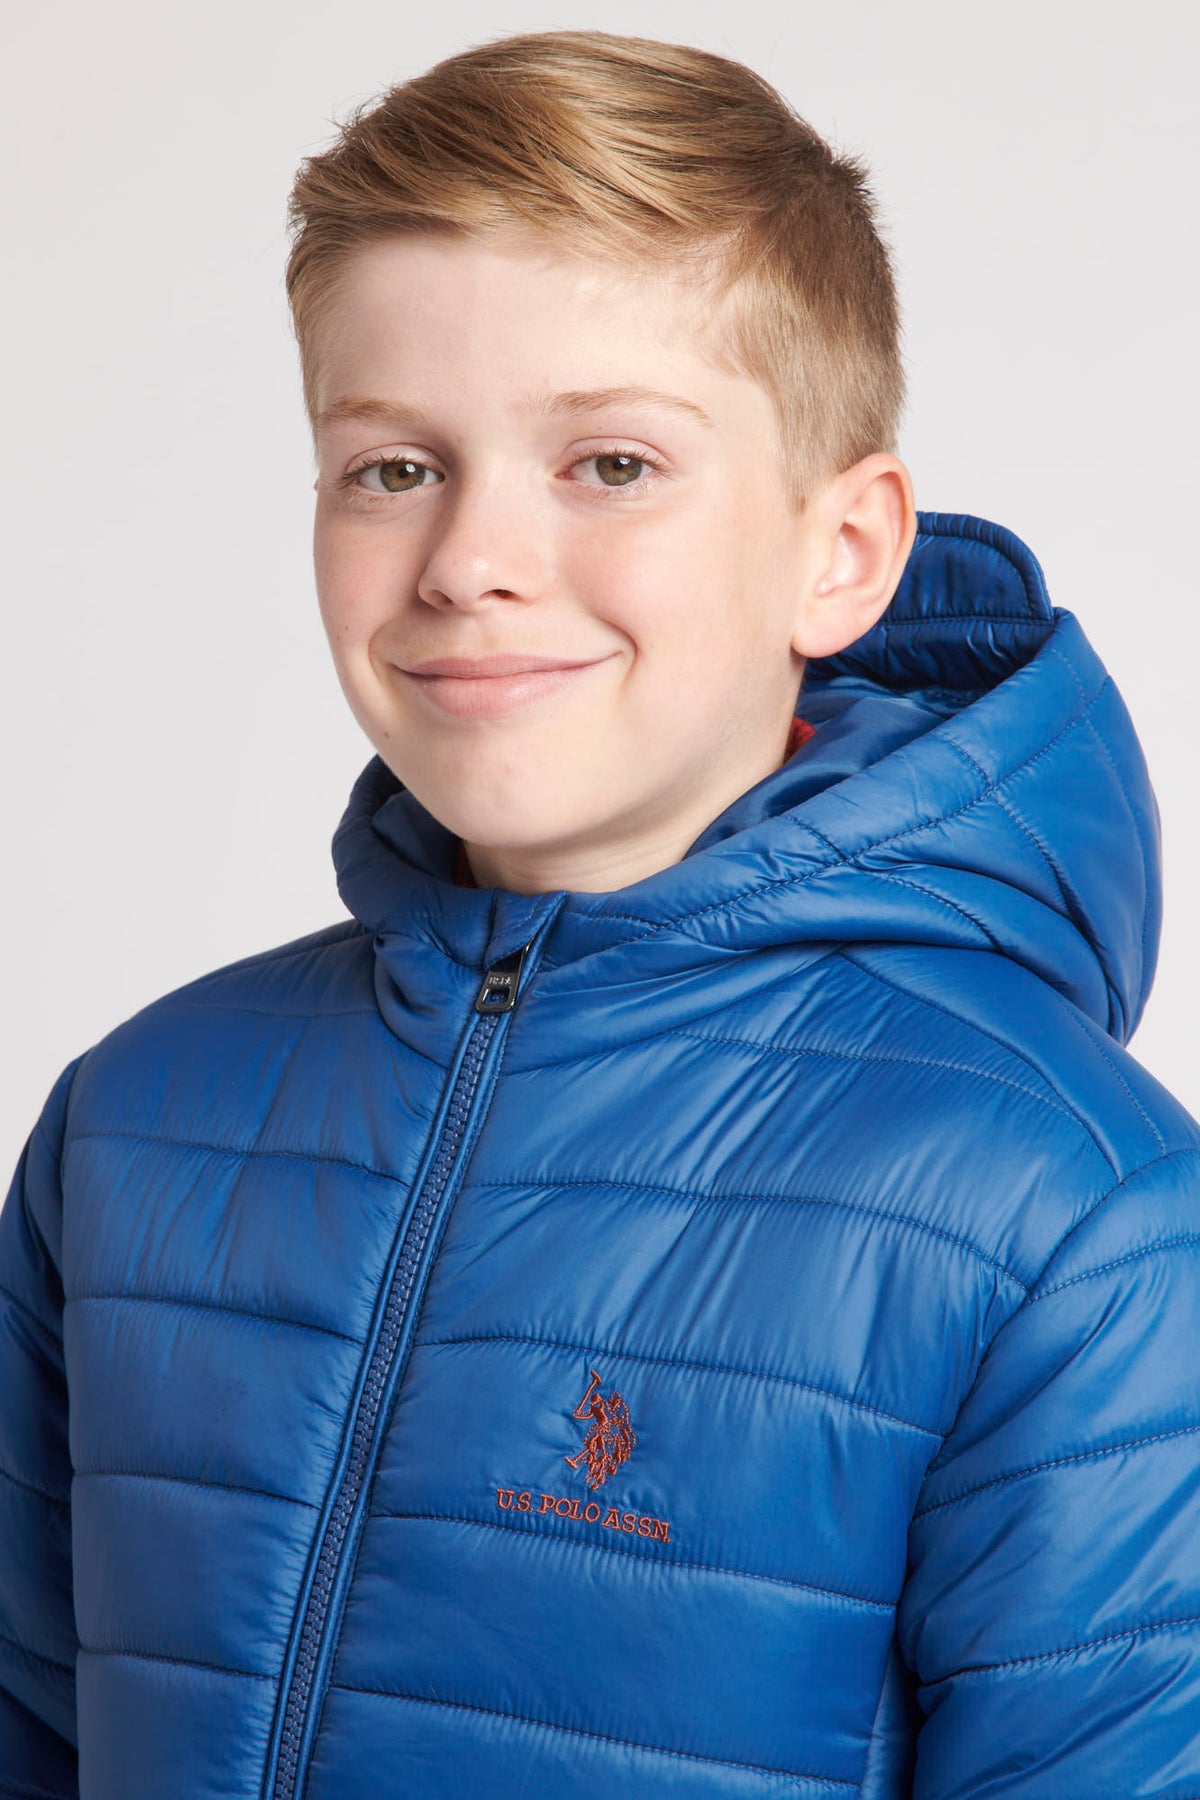 Boys Hooded Quilted Jacket in Set Sail